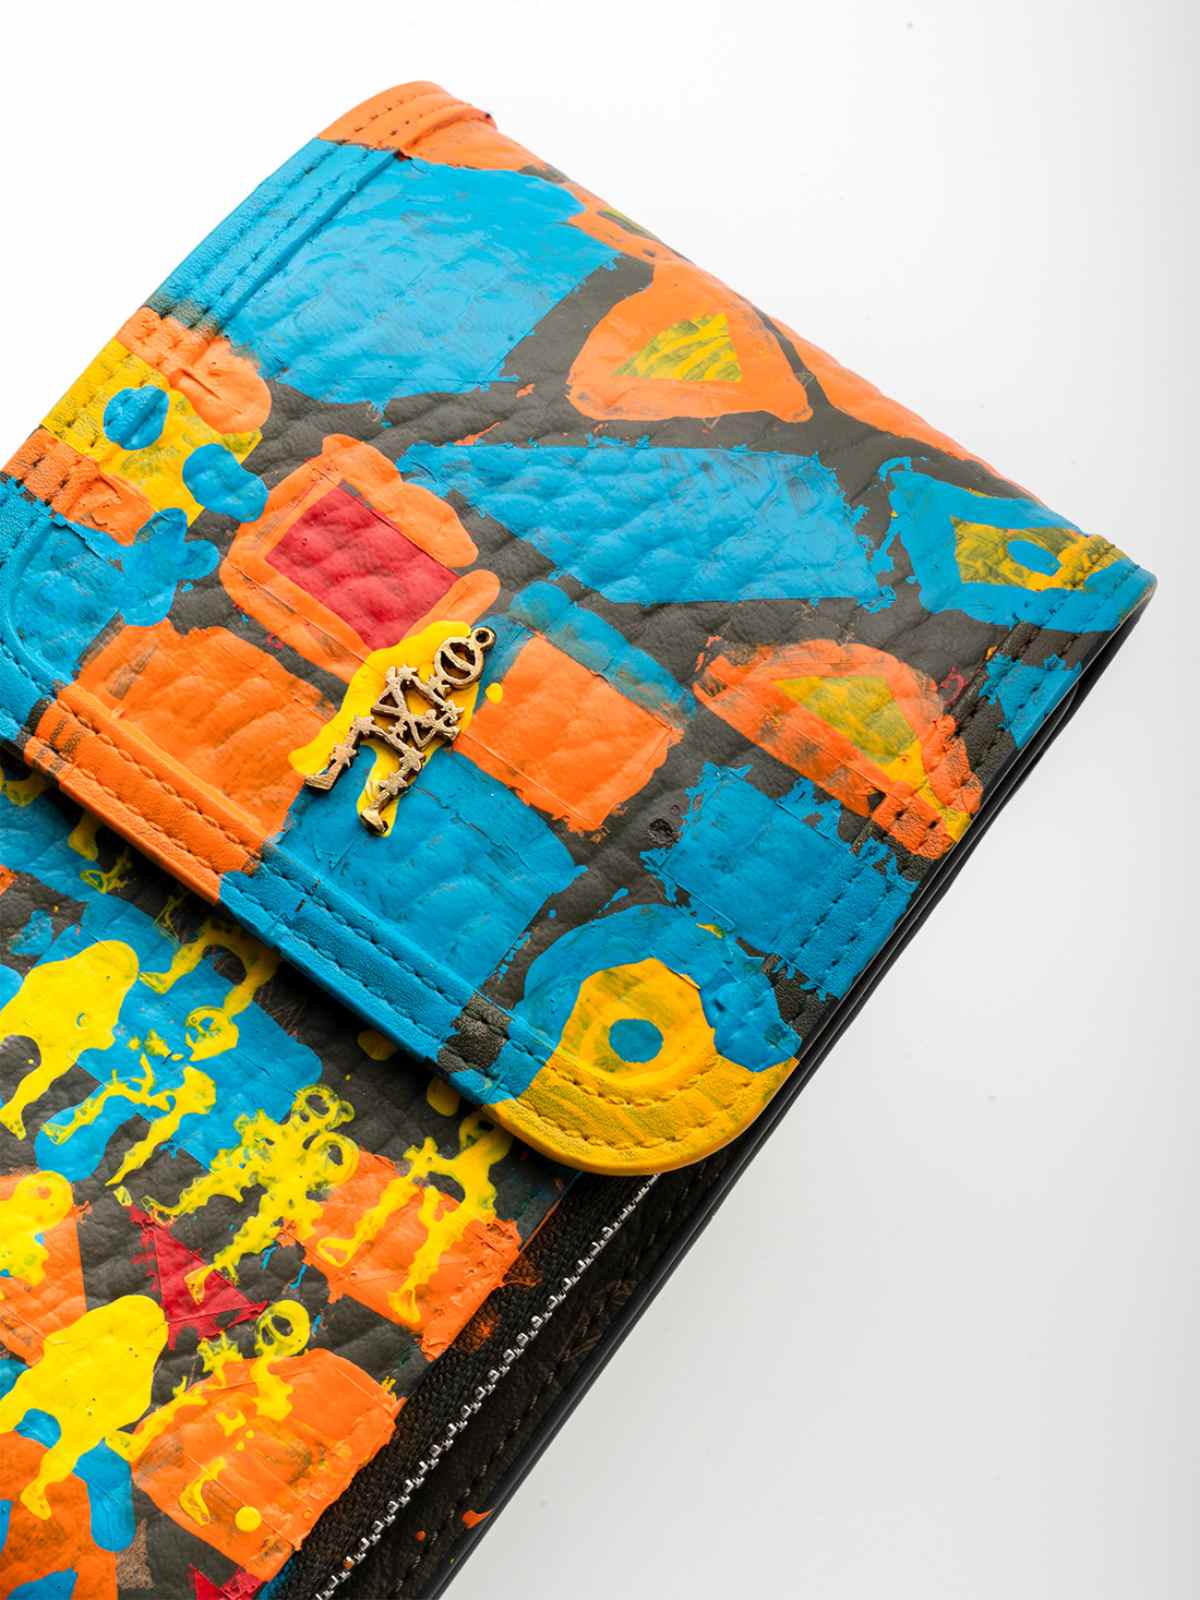 MCM Collaborates With Multi-Talented Ghanaian Artist Selassie